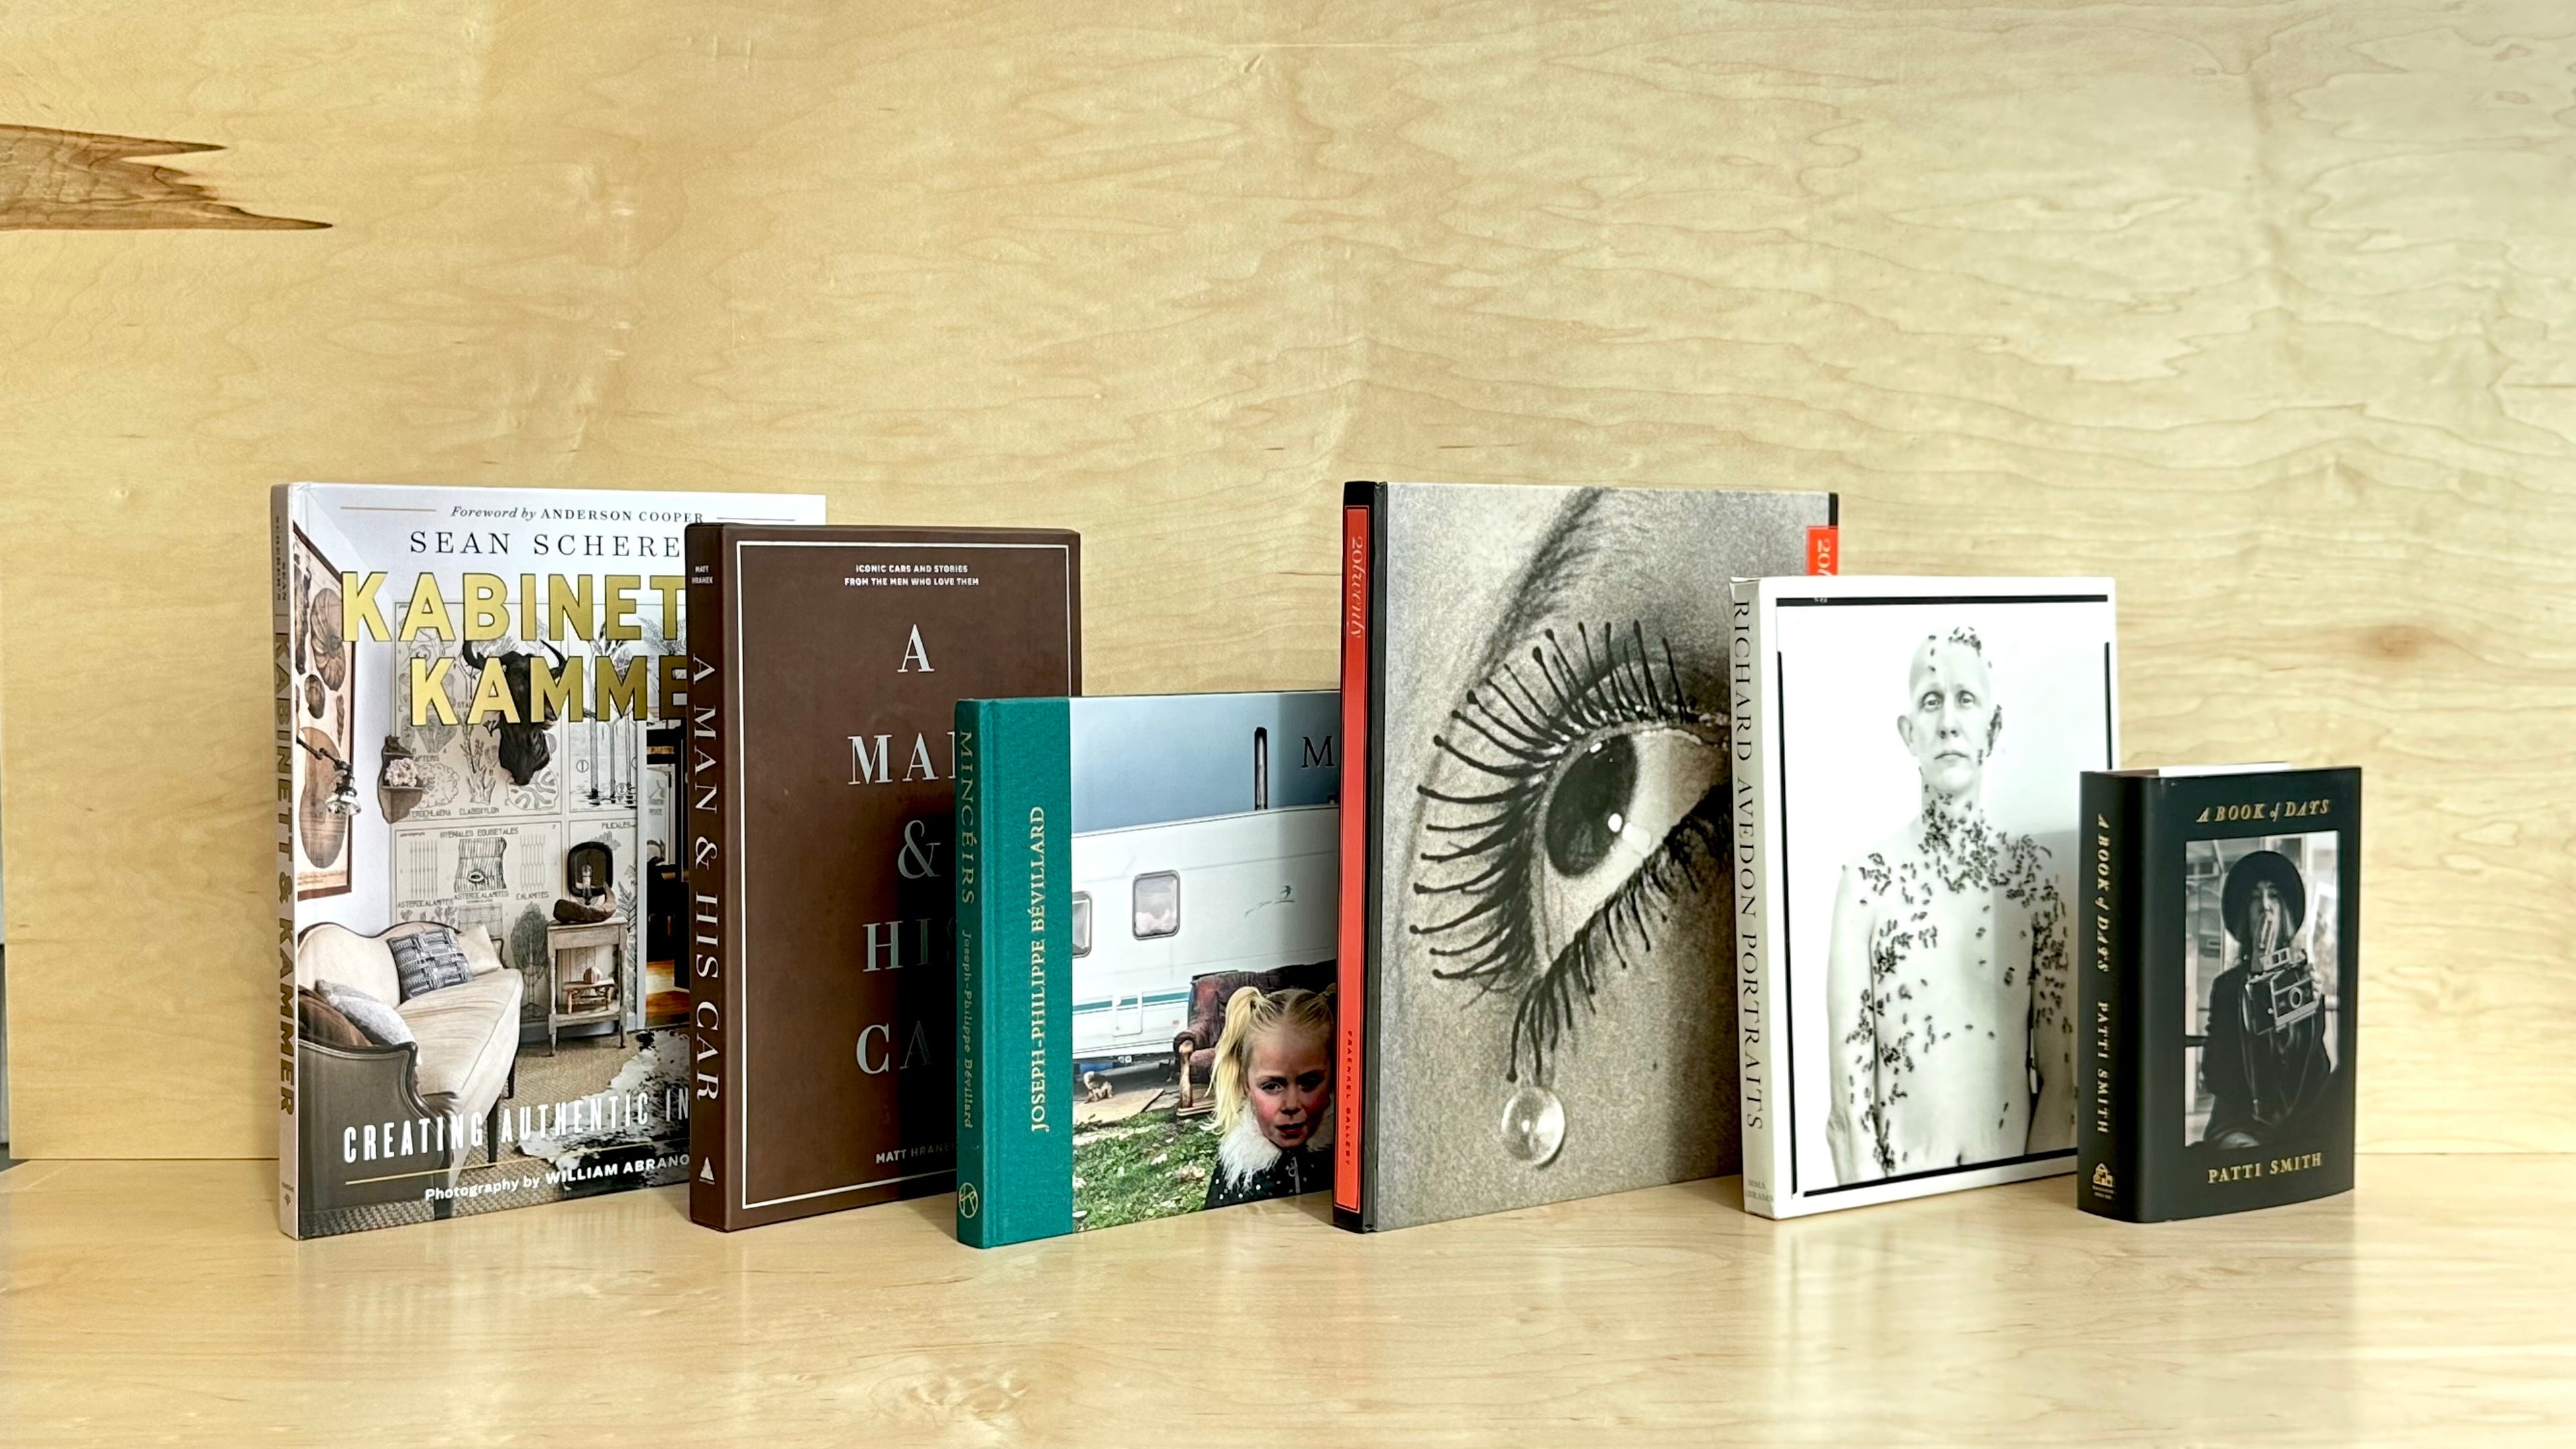 Line up of books, including Kabinett and Kammer, A Man and His Car, Mincéirs, Avedon Portraits, Patti Smith's Book of Days. 